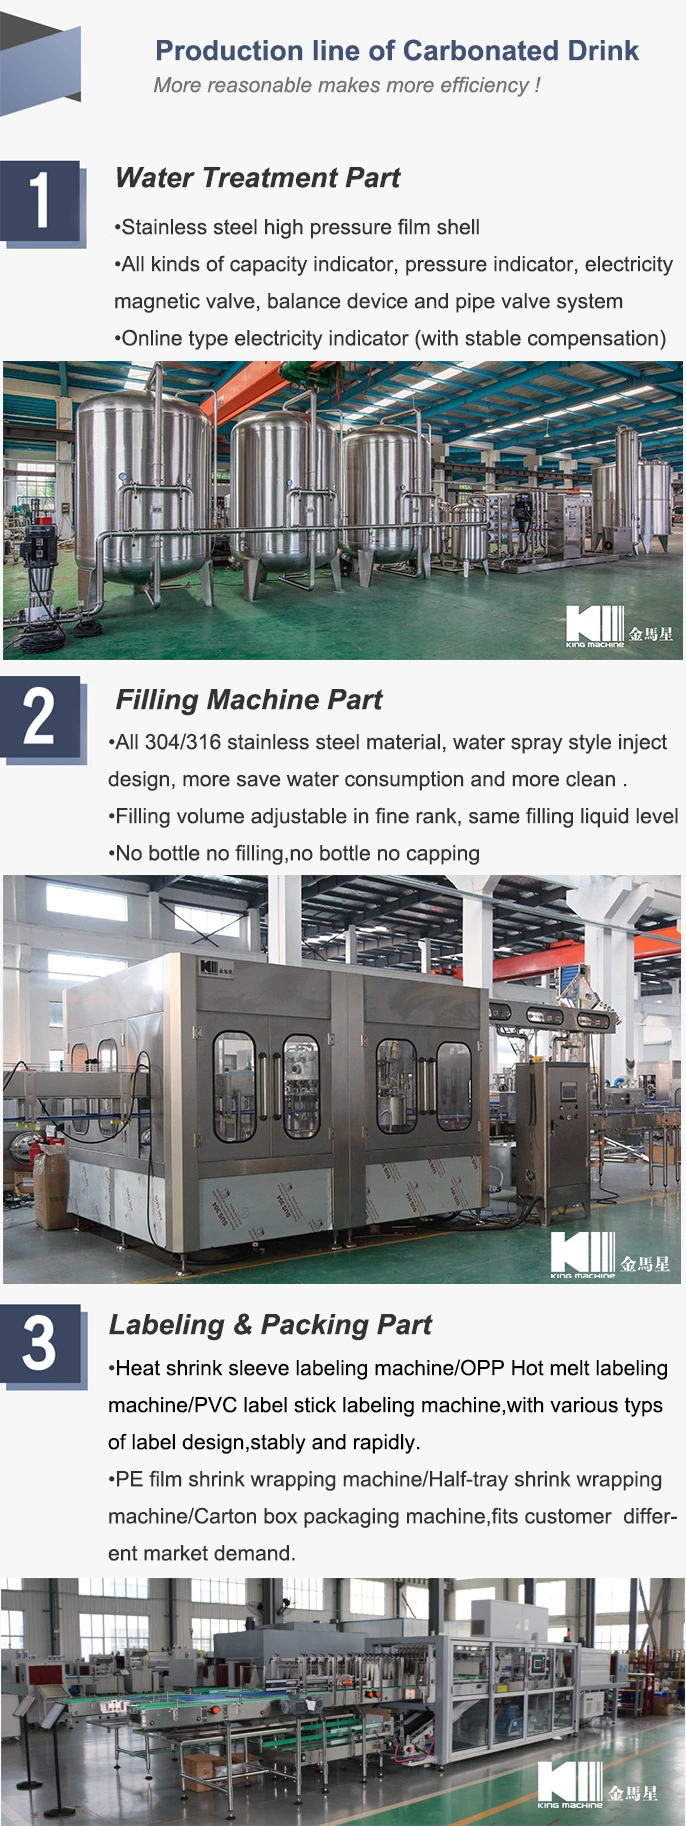 2000-36000bph Fully Automatic Energy Drink Bottle Filling Caping Machine